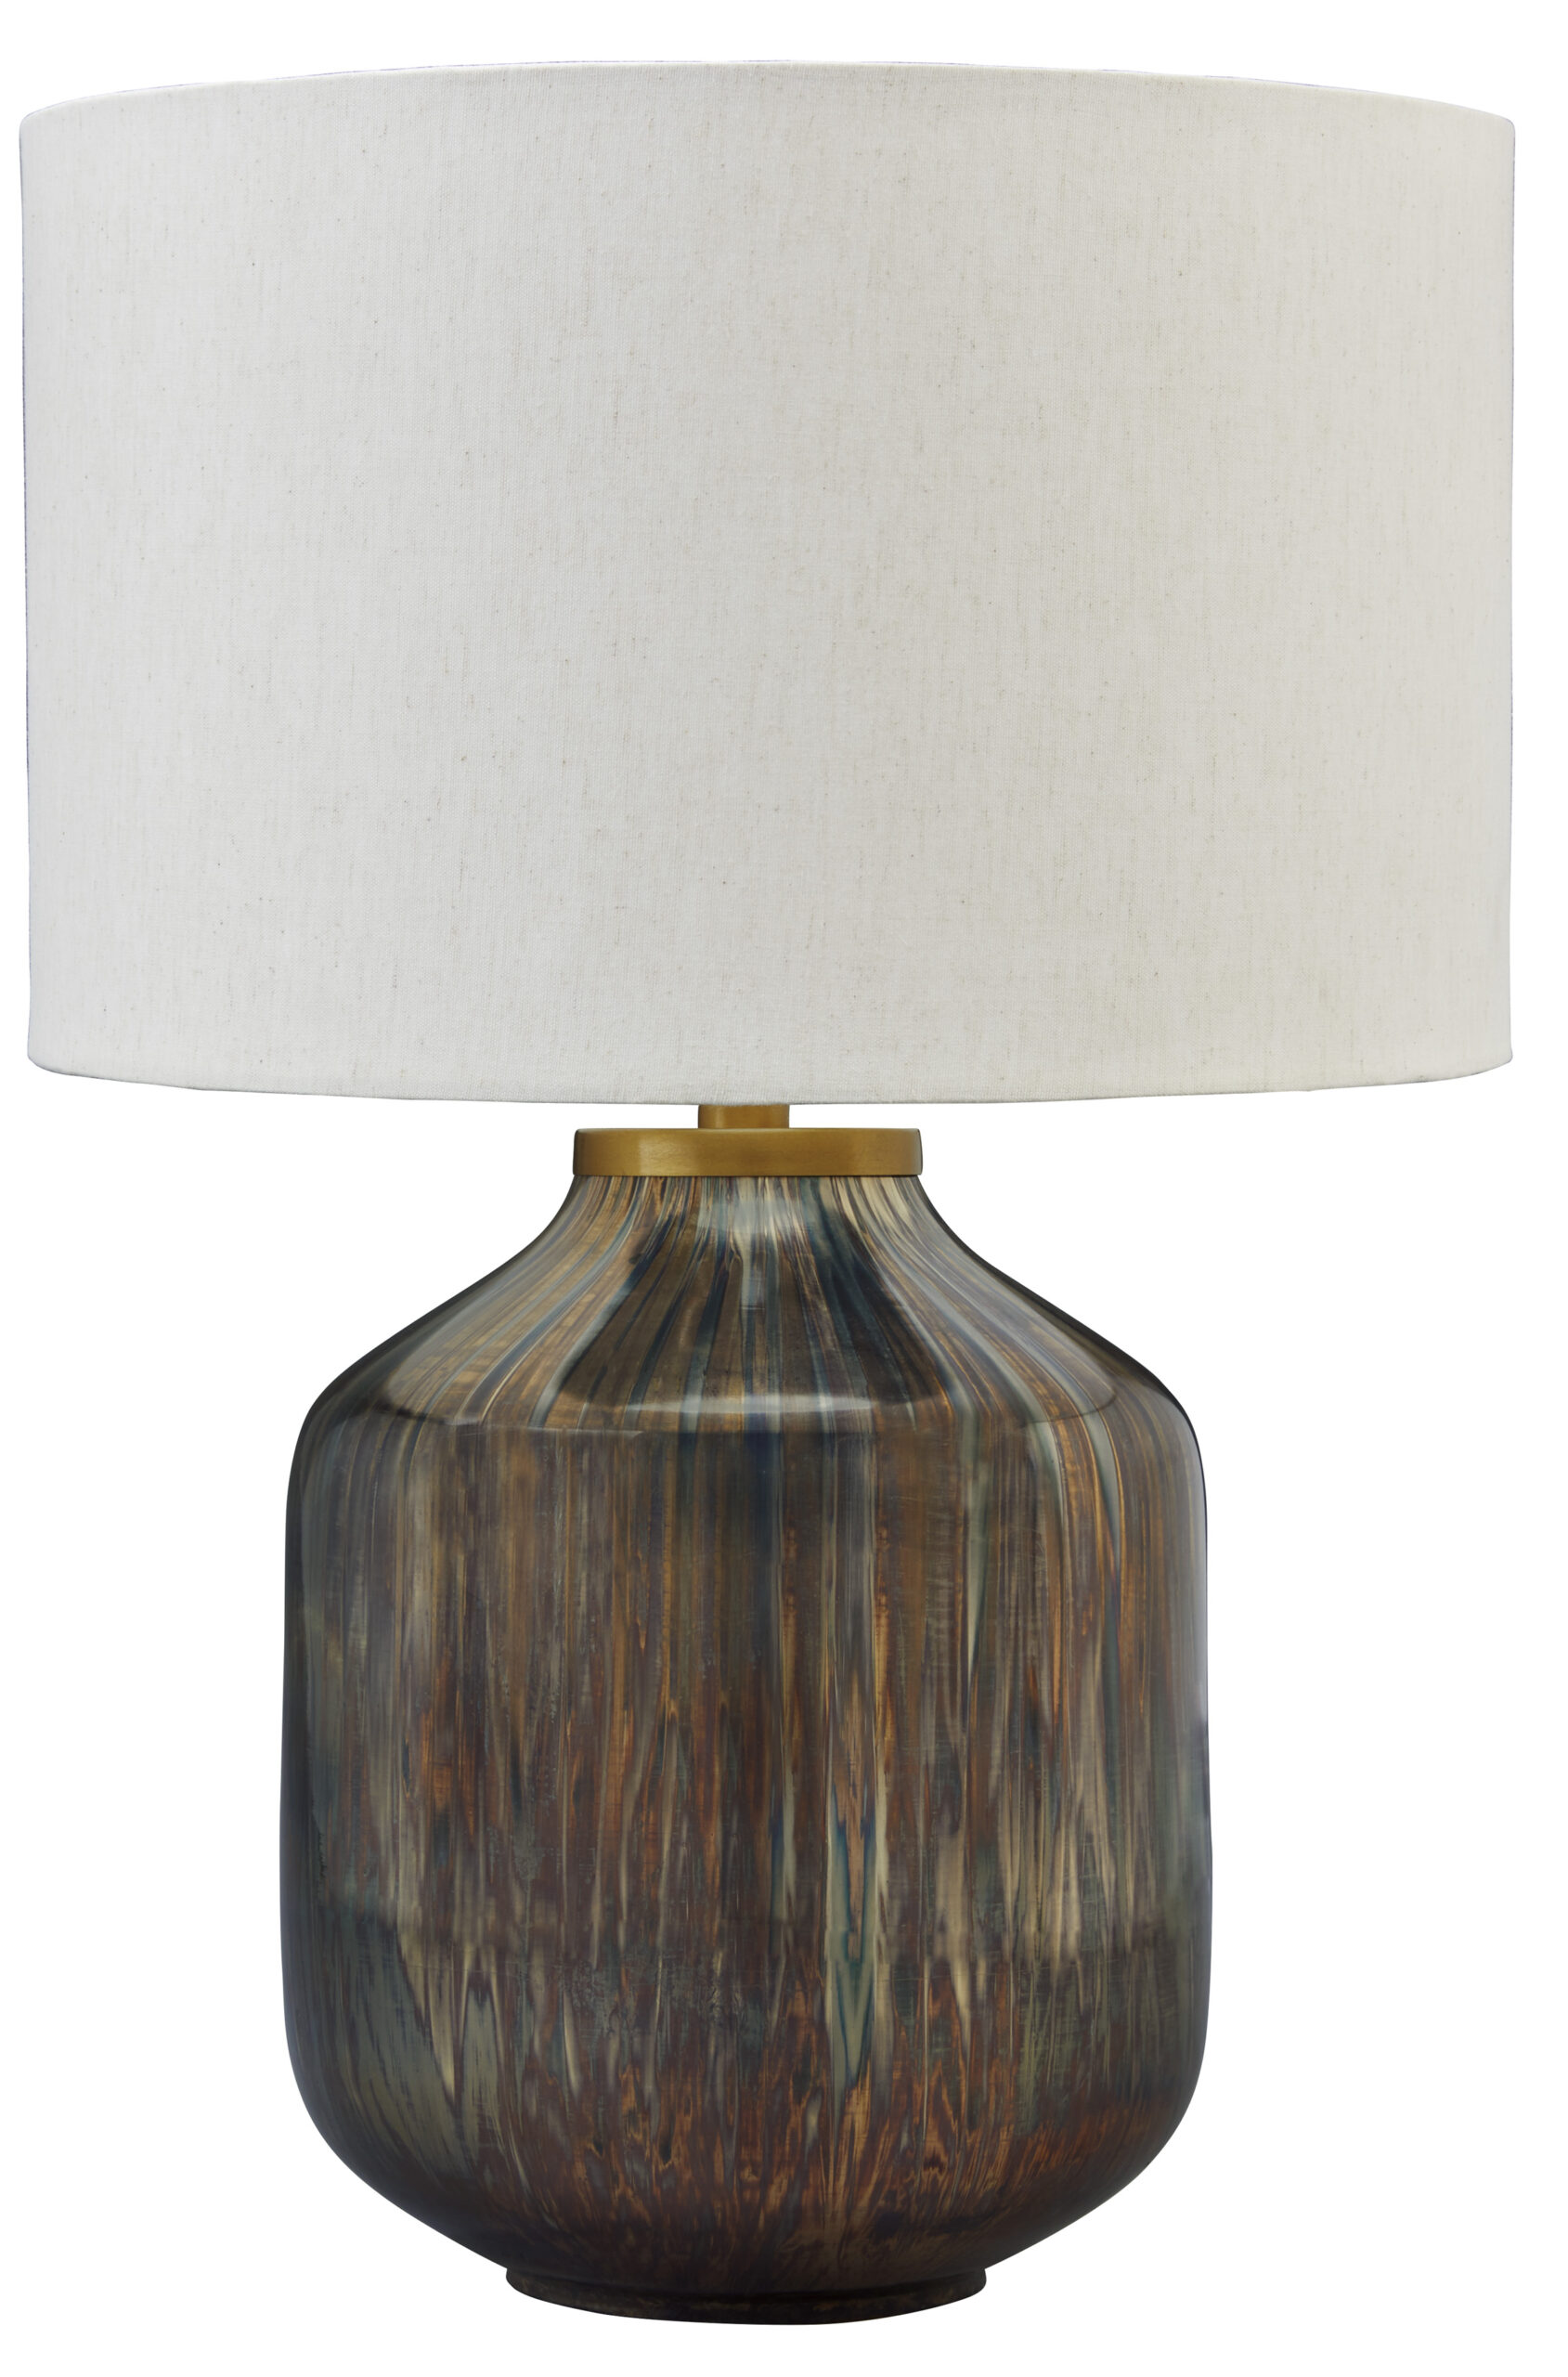 L430804 Jadstow Table Lamp